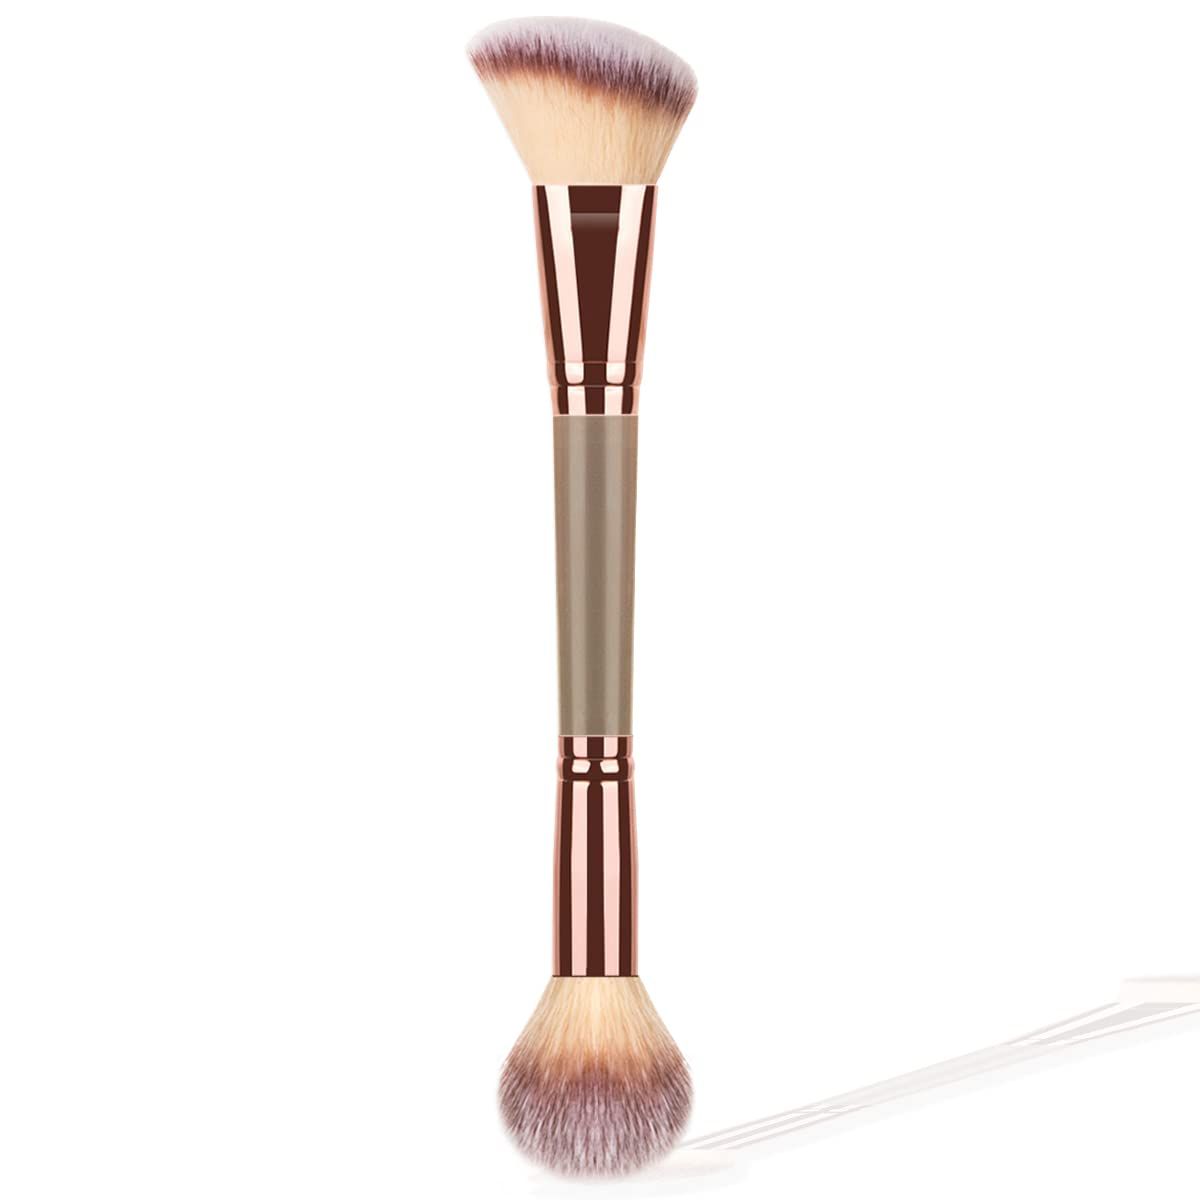 KINGMAS Foundation Makeup Brush, Double-ended Angled/Round Top Contour Makeup Brush for Blending ... | Amazon (US)